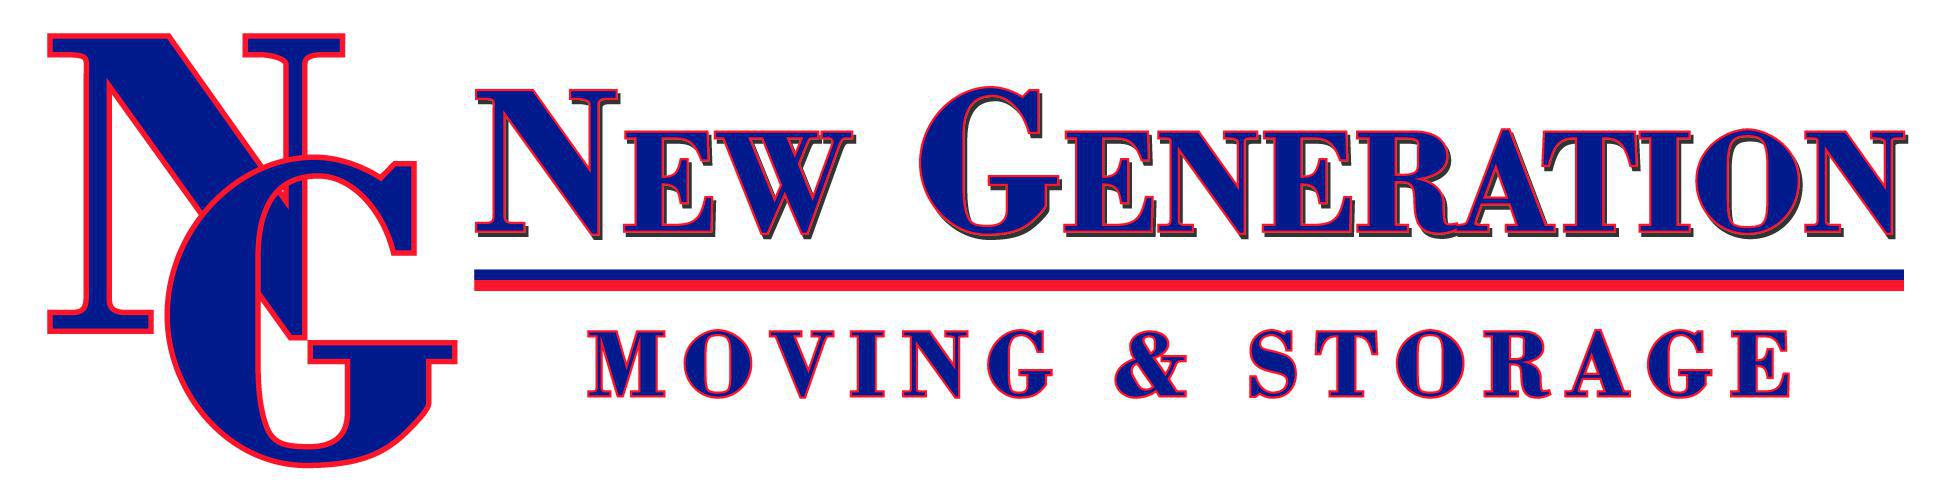 New Generation Moving And Storage logo 1